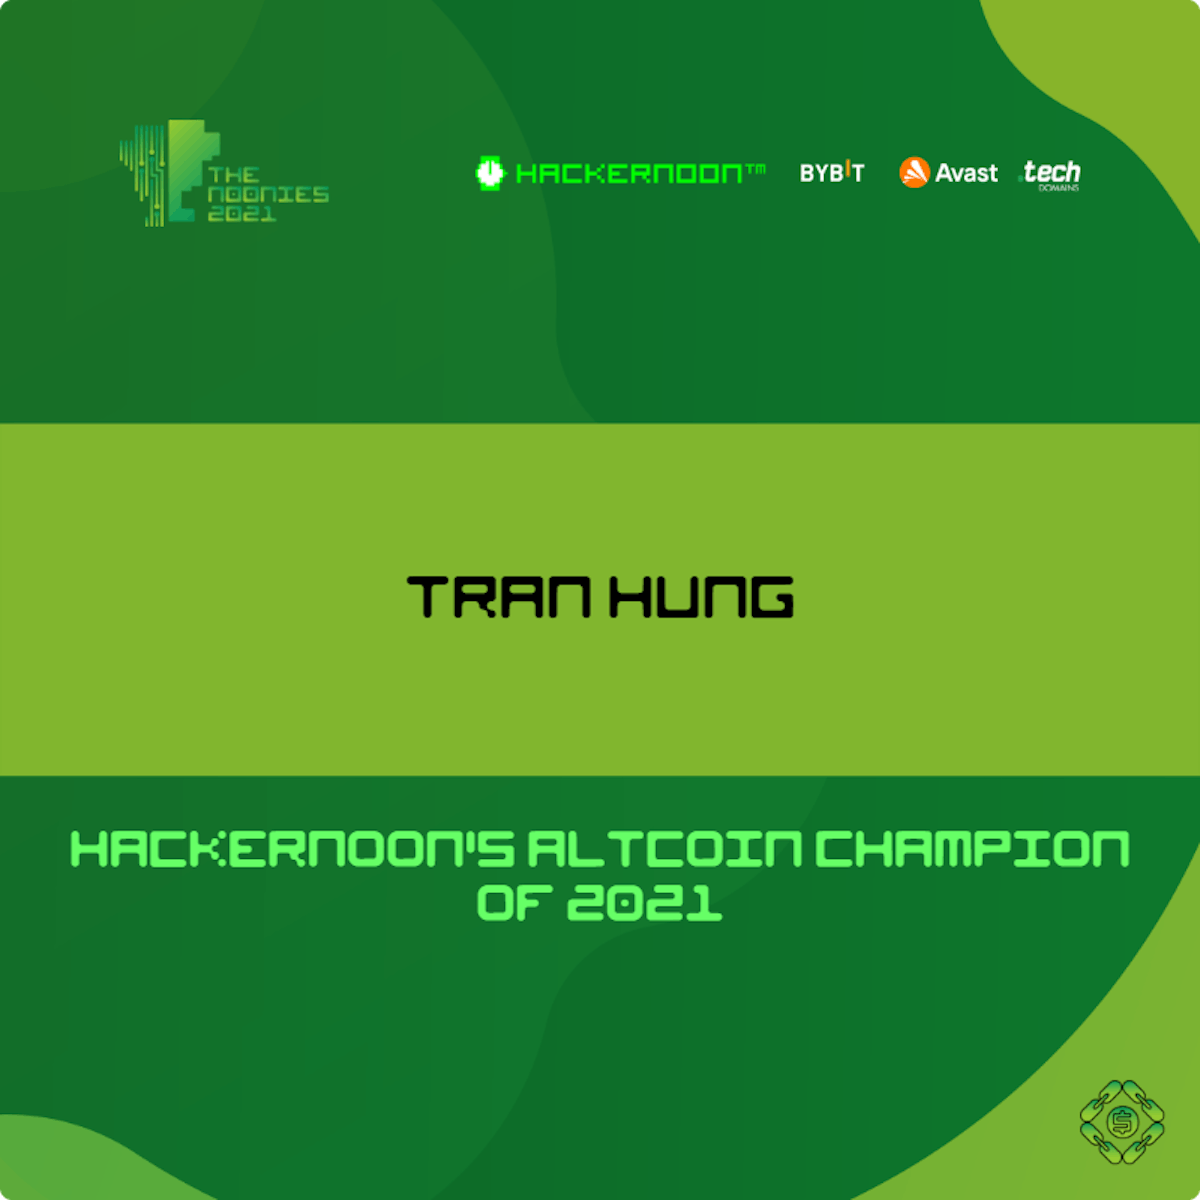 featured image - Tran Hung is HackerNoon's Altcoin Champion of 2021